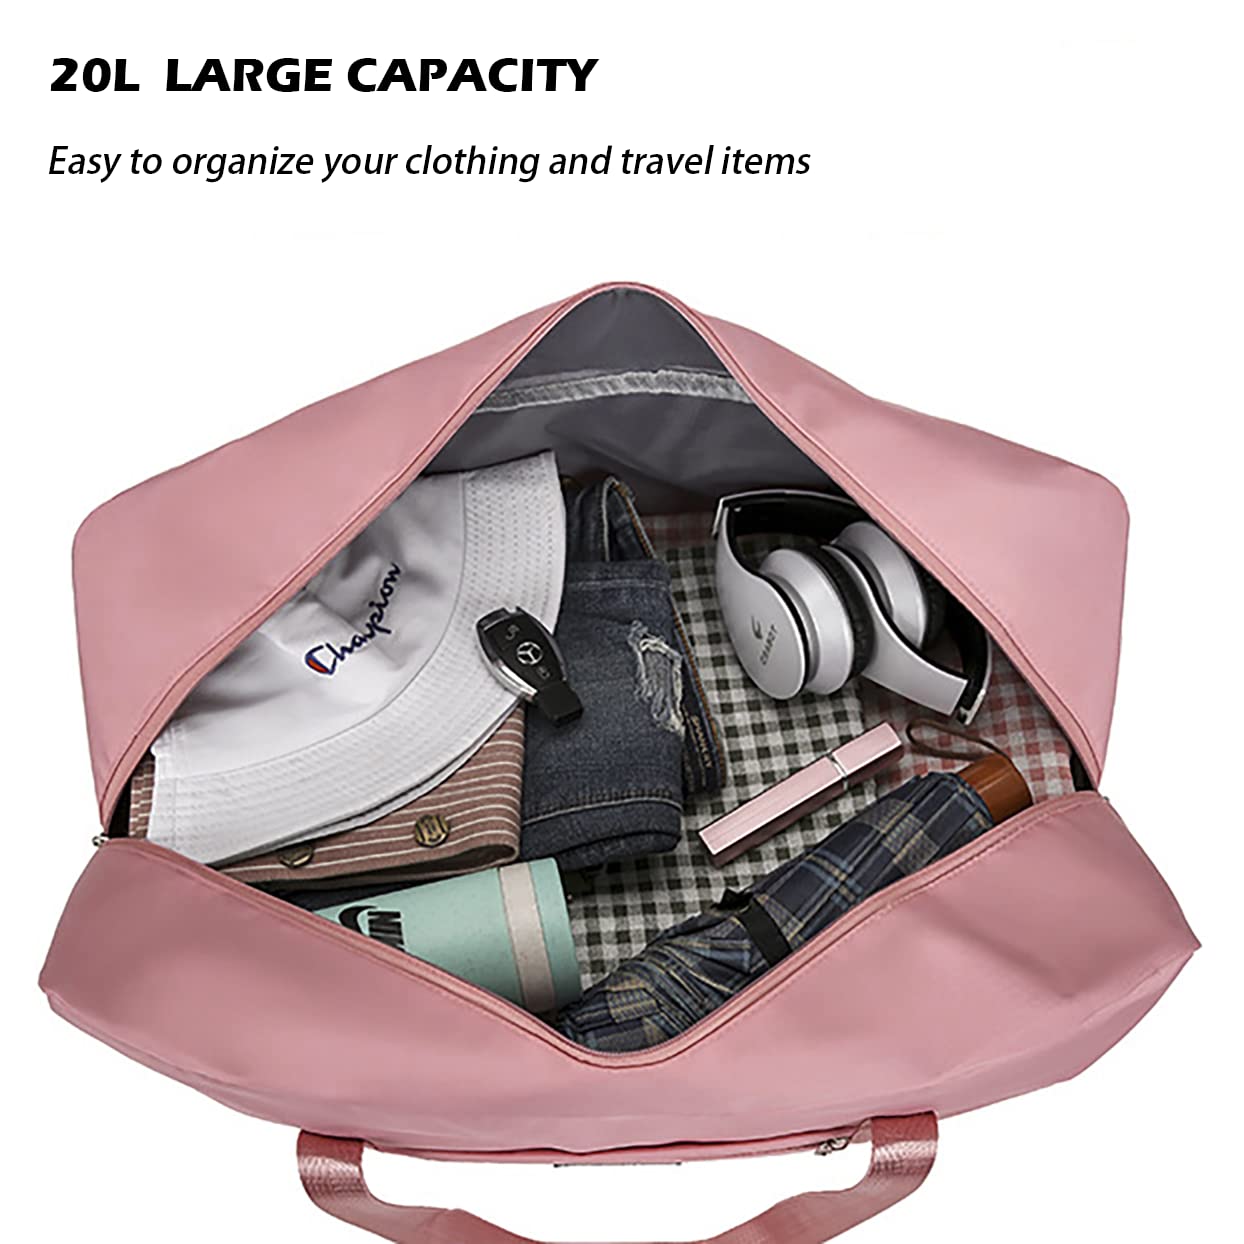 IMCUZUR Travel Duffel Bag, for Spirit Airlines Personal Item Bag 18x14x8 Carry on Luggage Overnight Bag, Weekender Bag for Women and Men (A-Pink), A-Pink, 17"L X 6"W X 13"H, Carry on Travel Bag